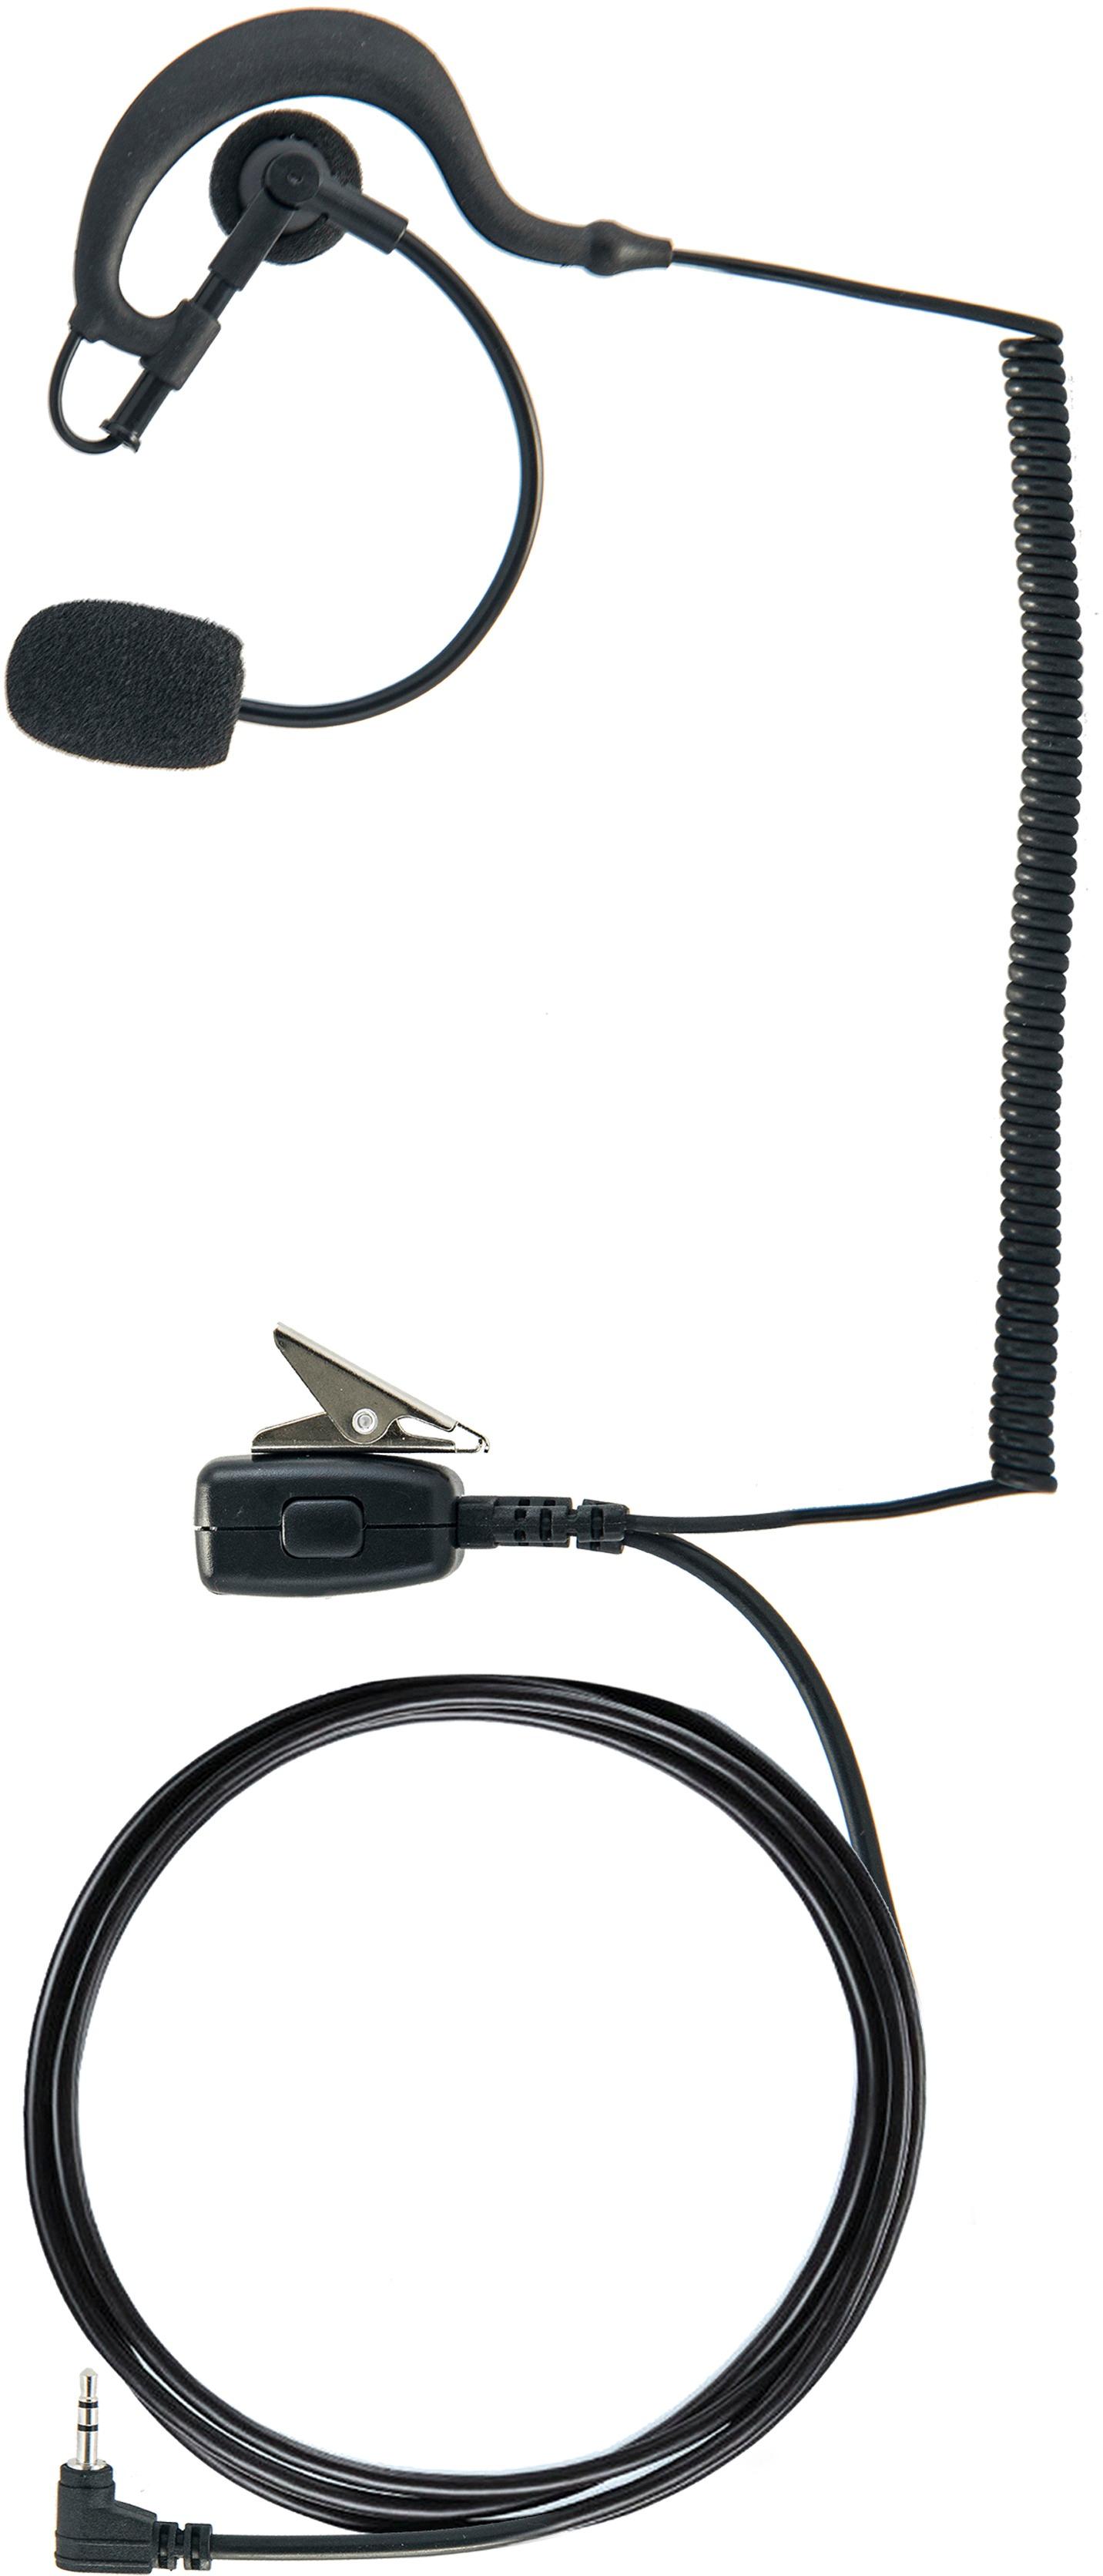 Angle View: Cobra - Earpiece with Boom Microphone Headset for 2-Way Radios - Black